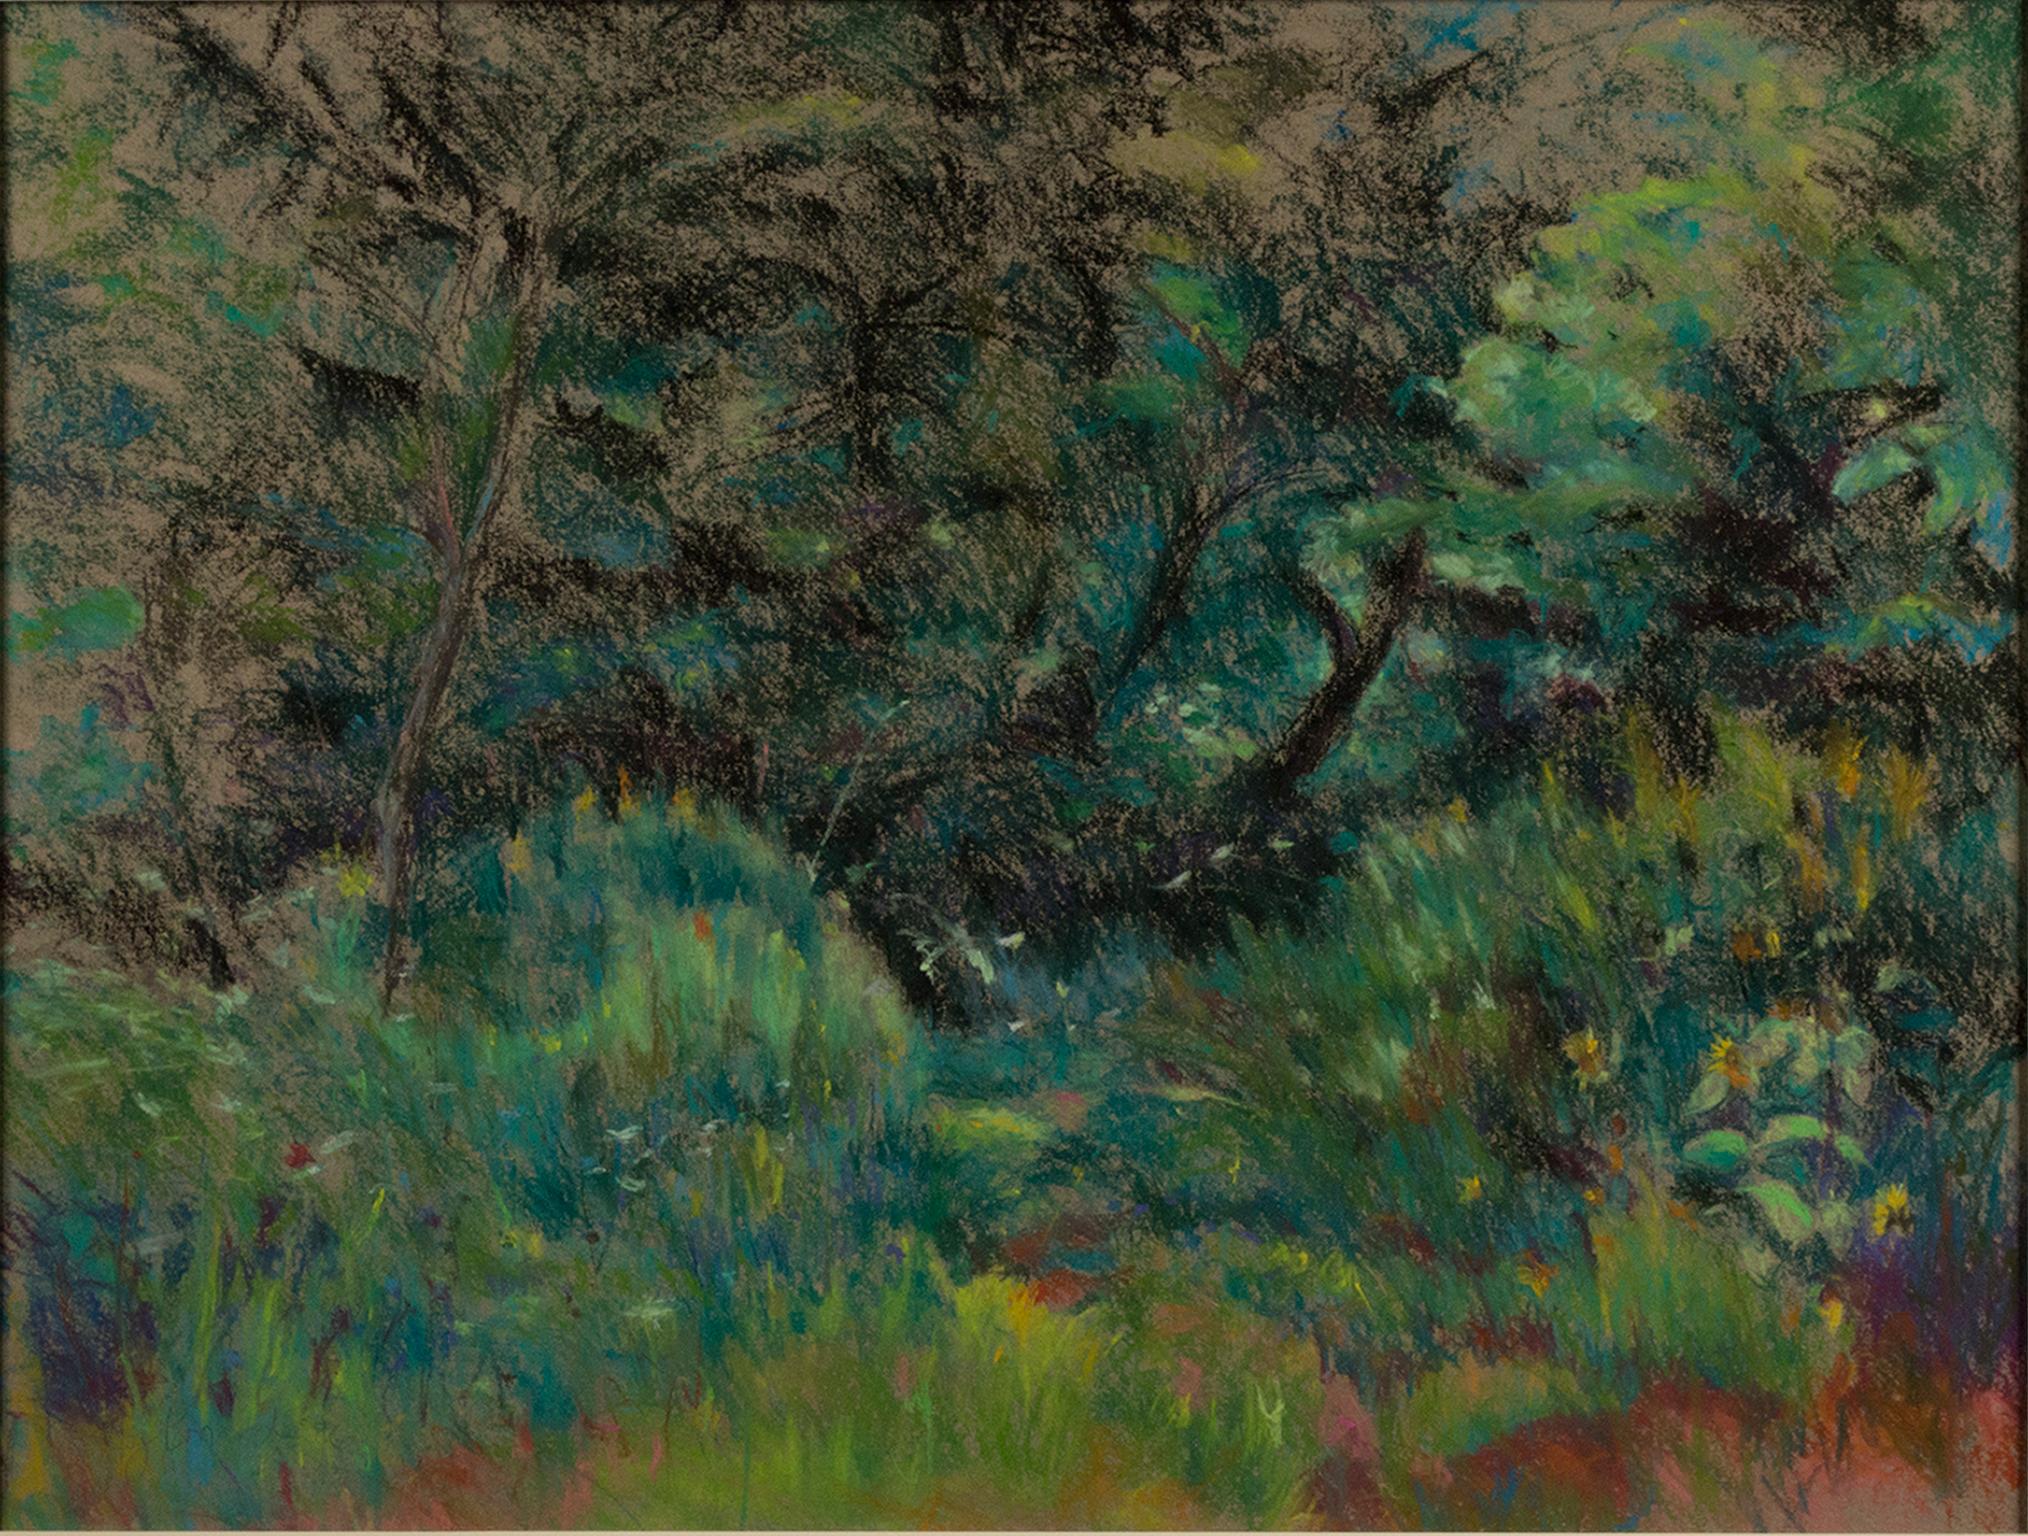 Peggy Leonard Landscape Art - "The Humming of Cicadas at Chenequa, " Landscape Pastel Drawing on Canson paper